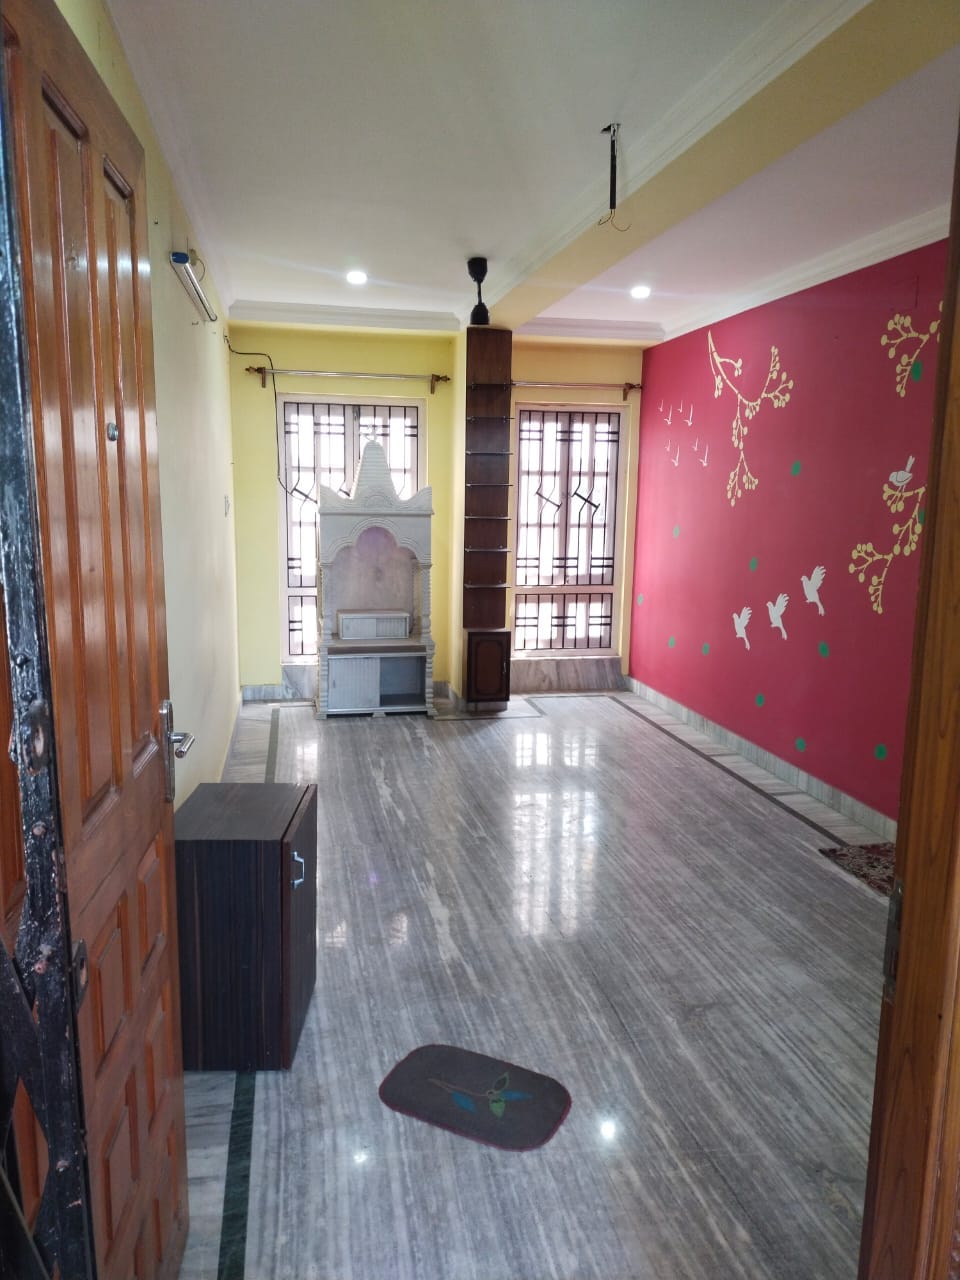 Ready to Move Condition 2BHK Flat Sale in Barrackpore